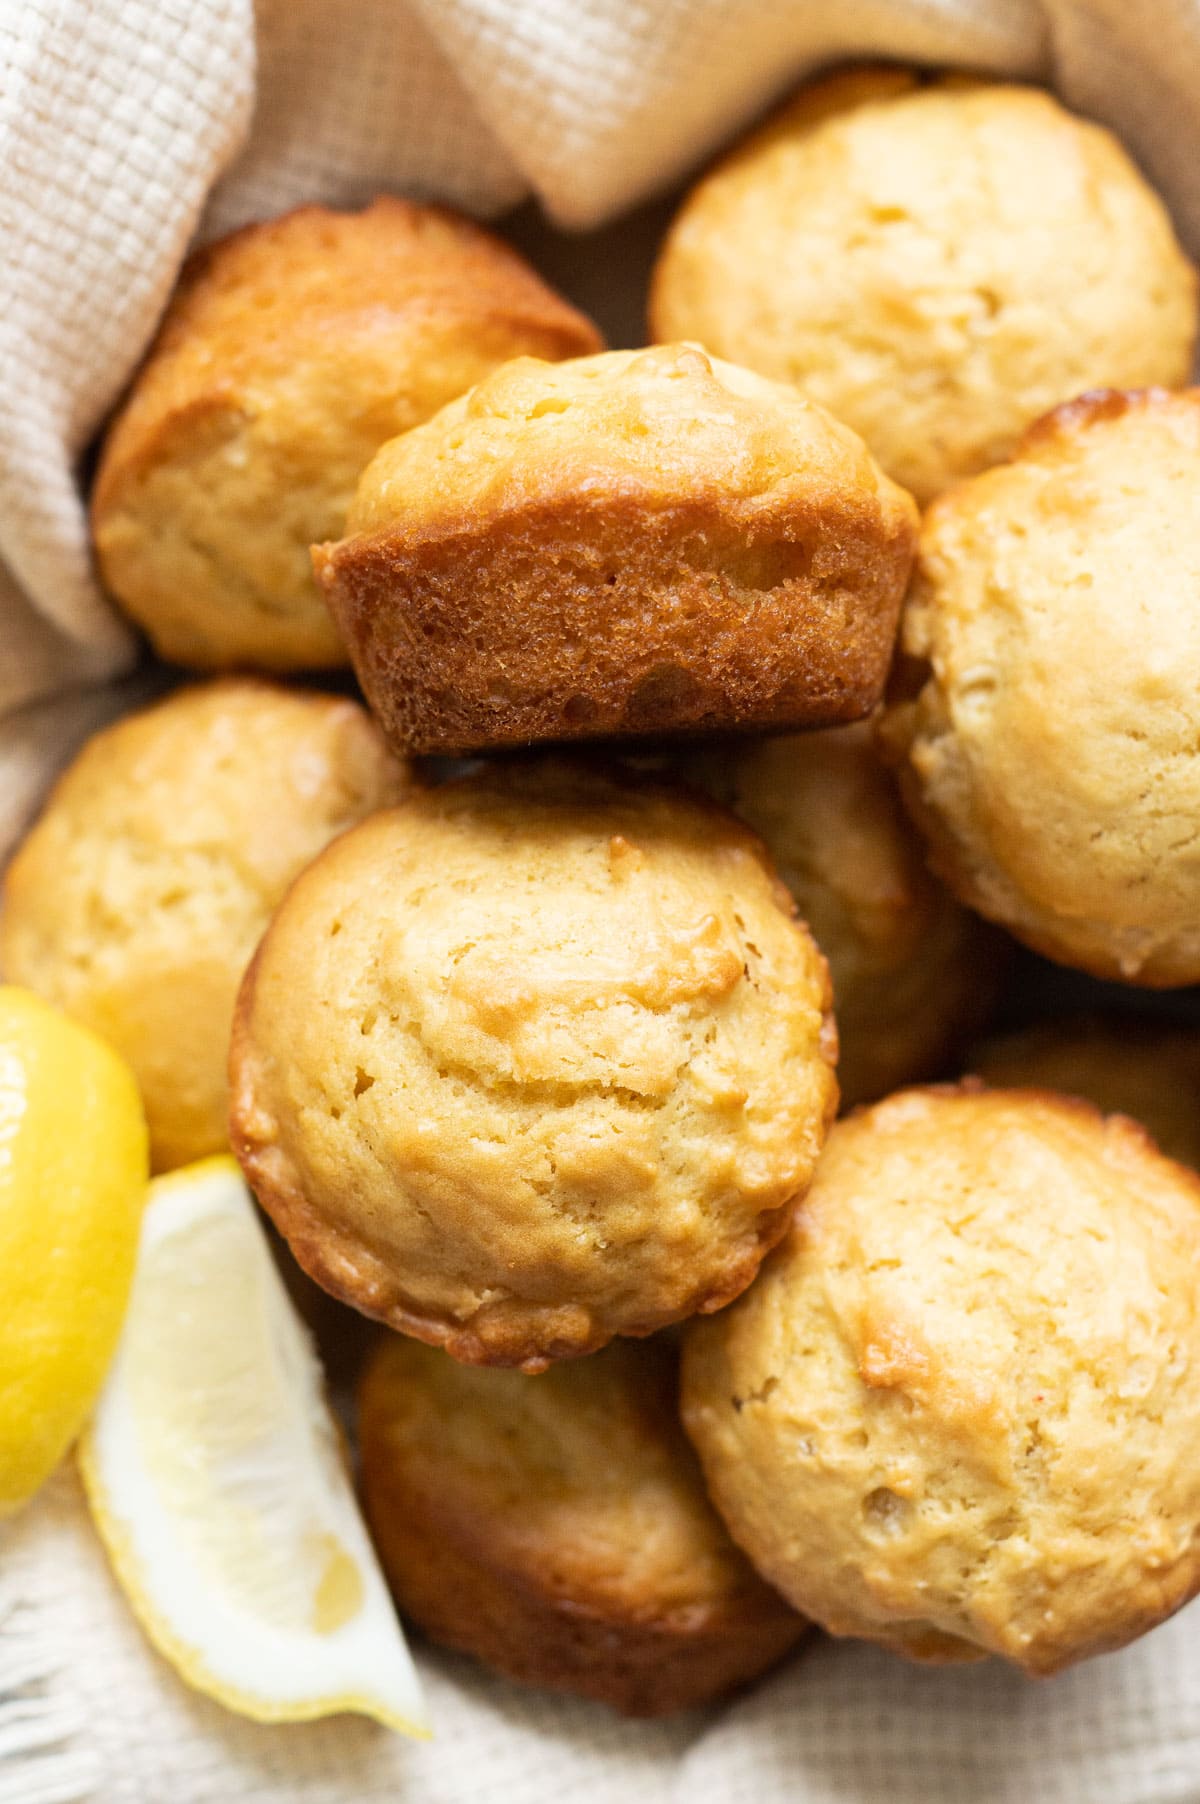 Lemon muffins served in a basket with a few slices of fresh lemon.